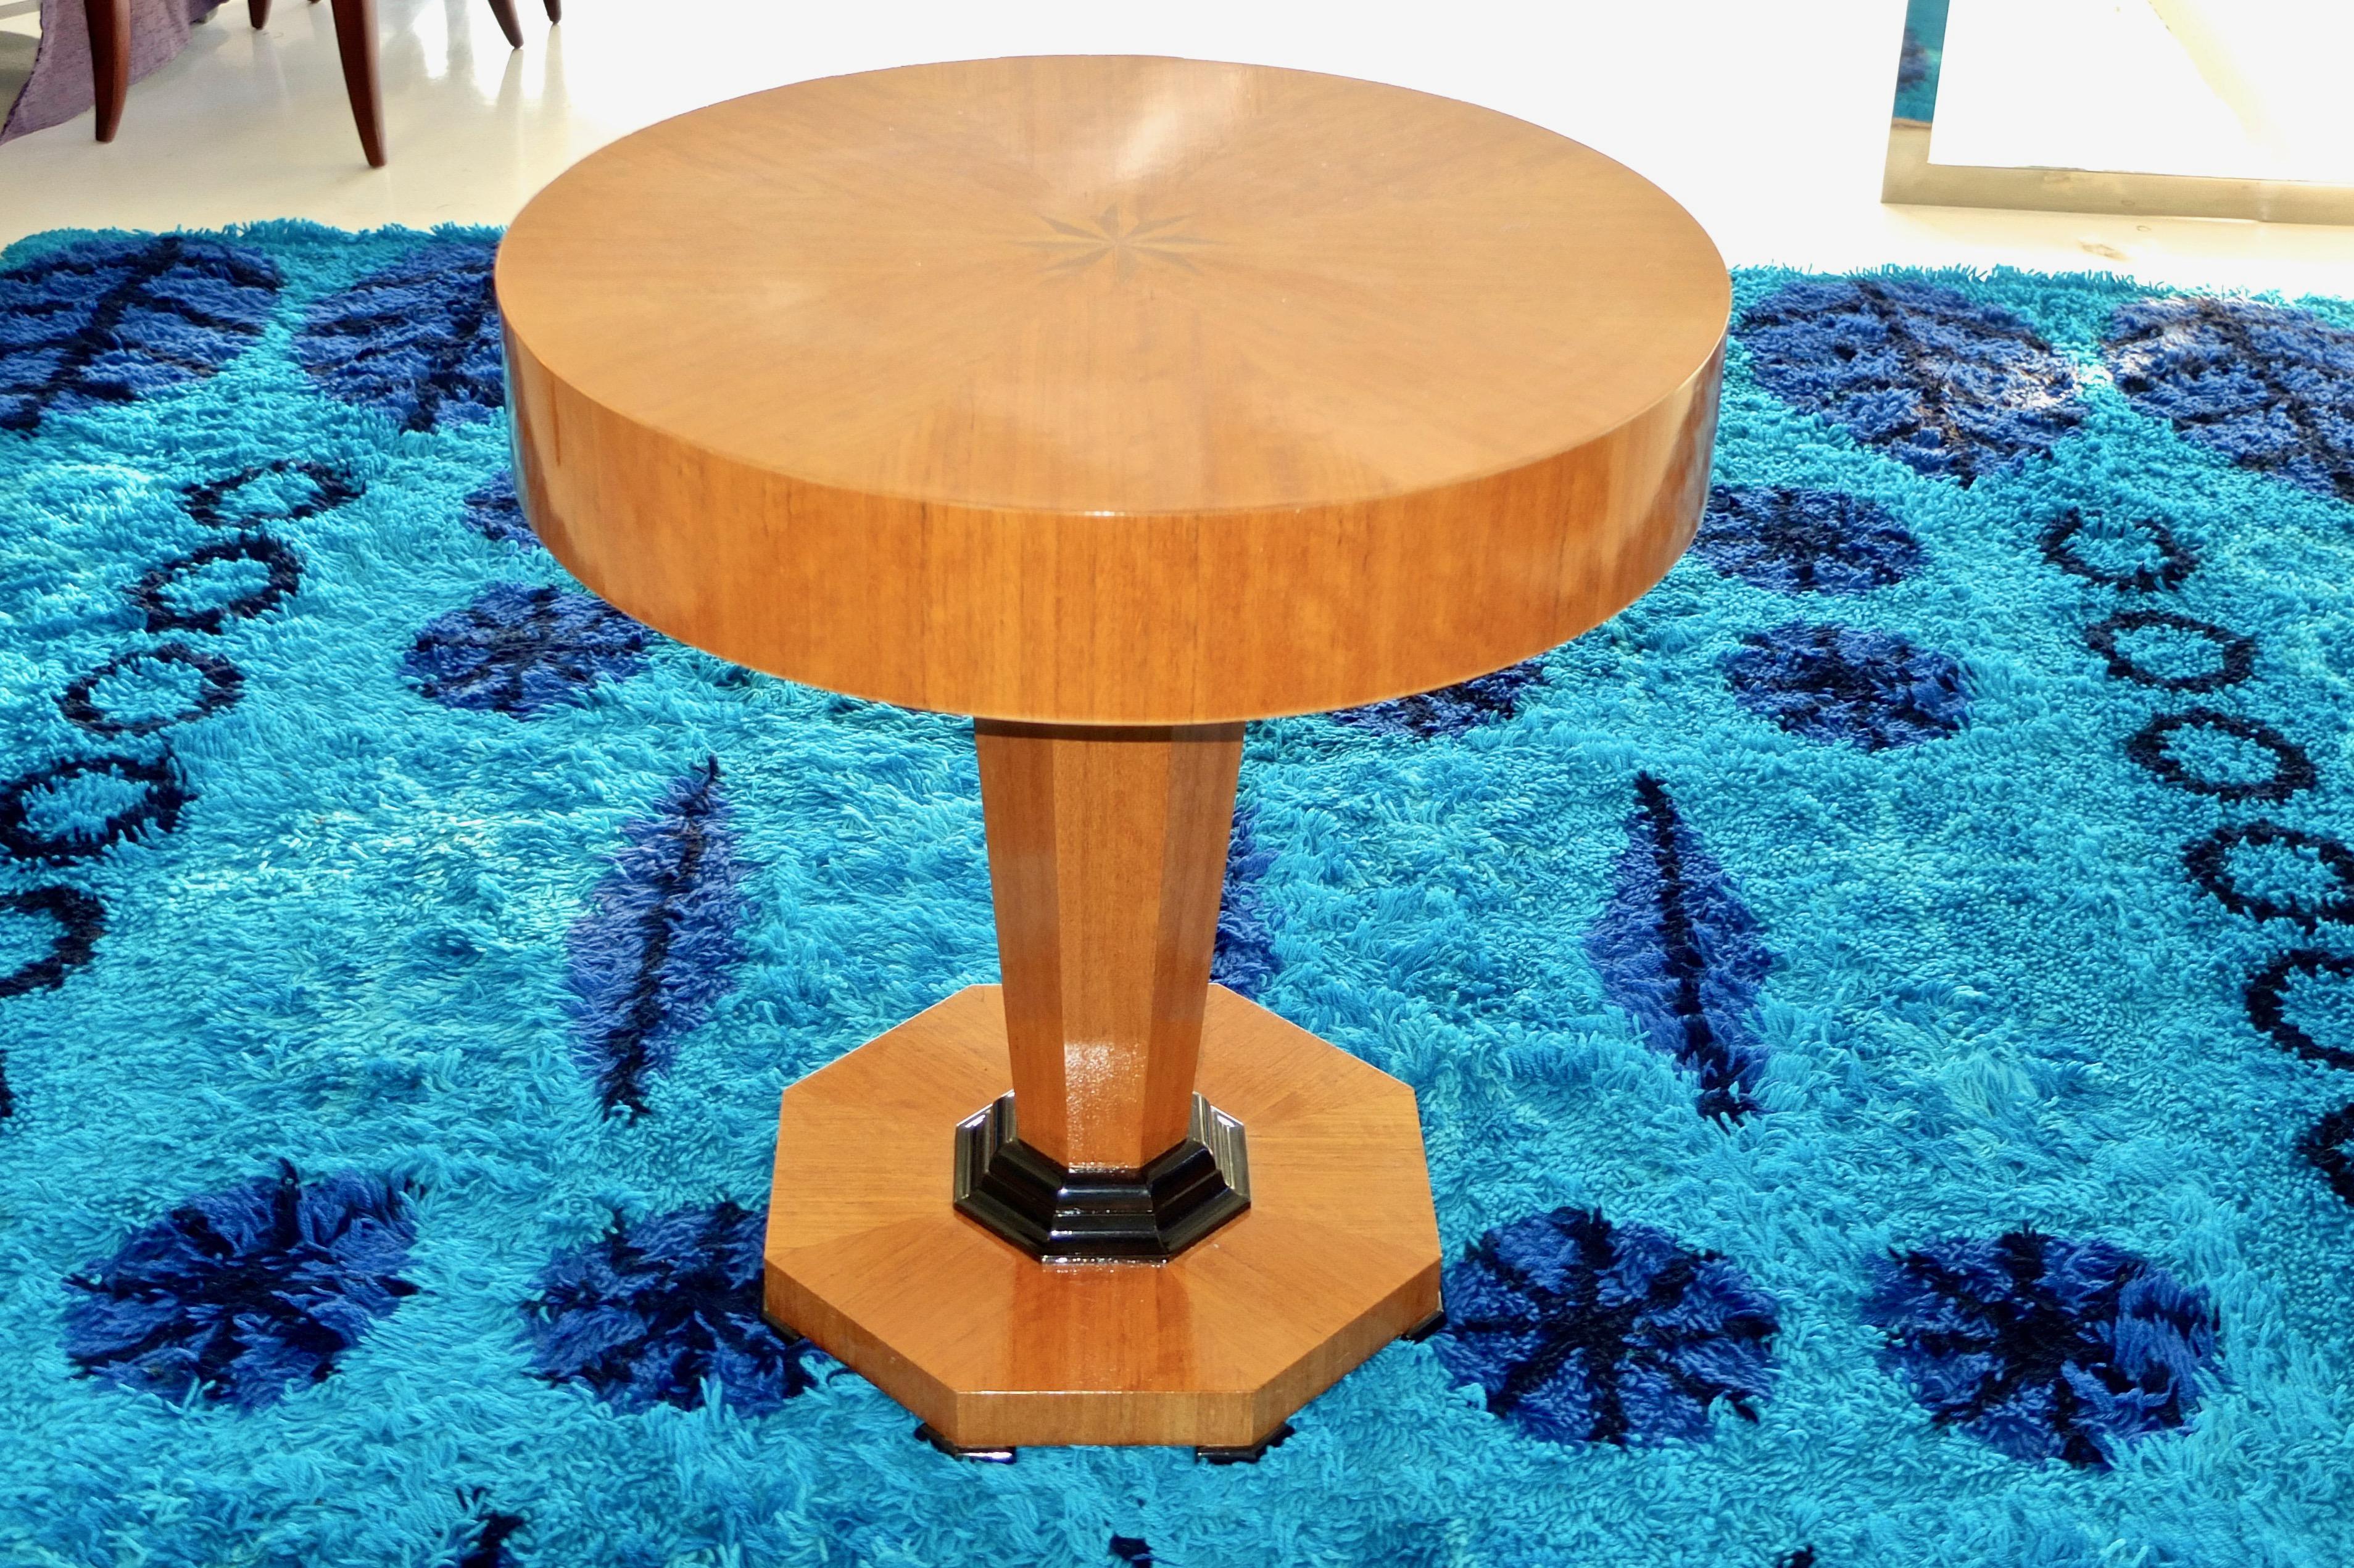 Pedestal table custom made by studio artist Gregg Lipton of Cumberland Maine circa 1989.  From the estate of Lipton's parents. American Modern influenced by the Biedermeier period in Austria. Featuring refined and sophisticated details in the grain